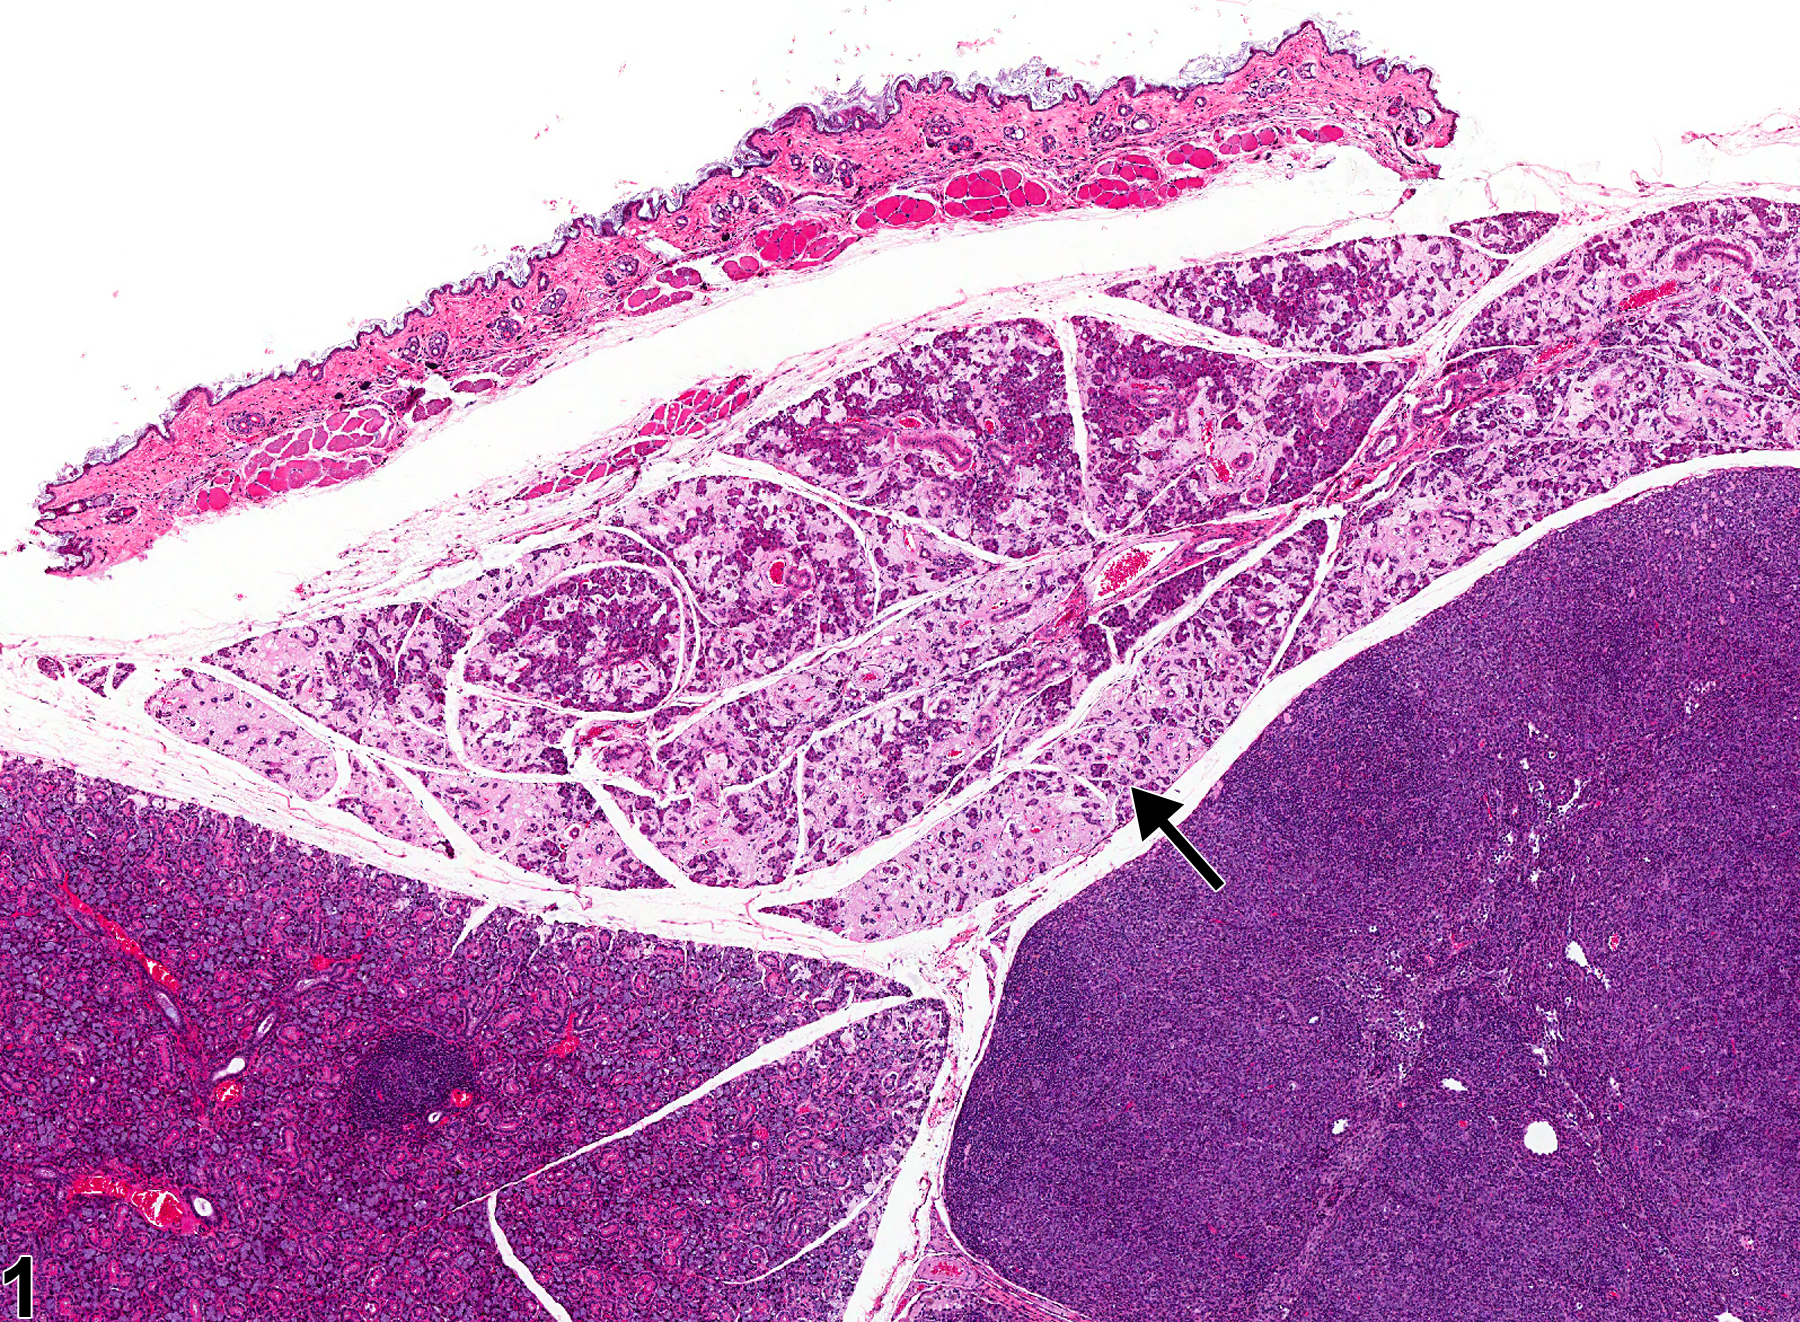 Image of amyloid in the salivary gland from a female Swiss Webster mouse in a chronic study